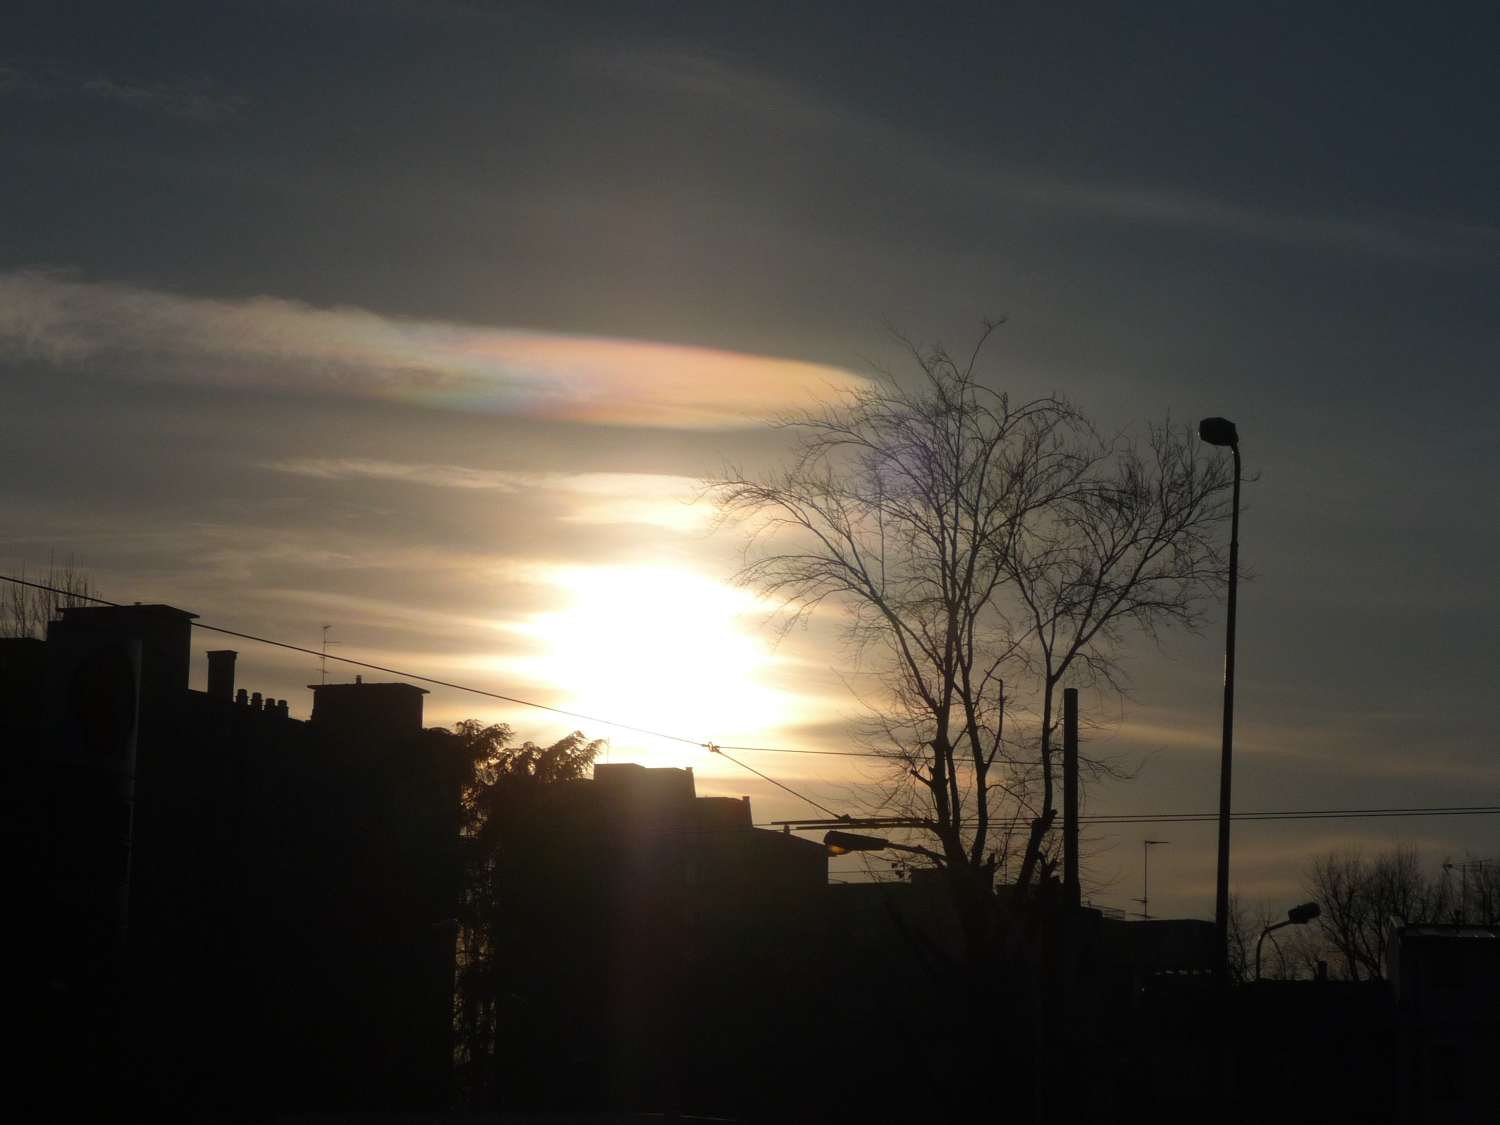 Iridescent clouds: 73 KB; click on the image to enlarge